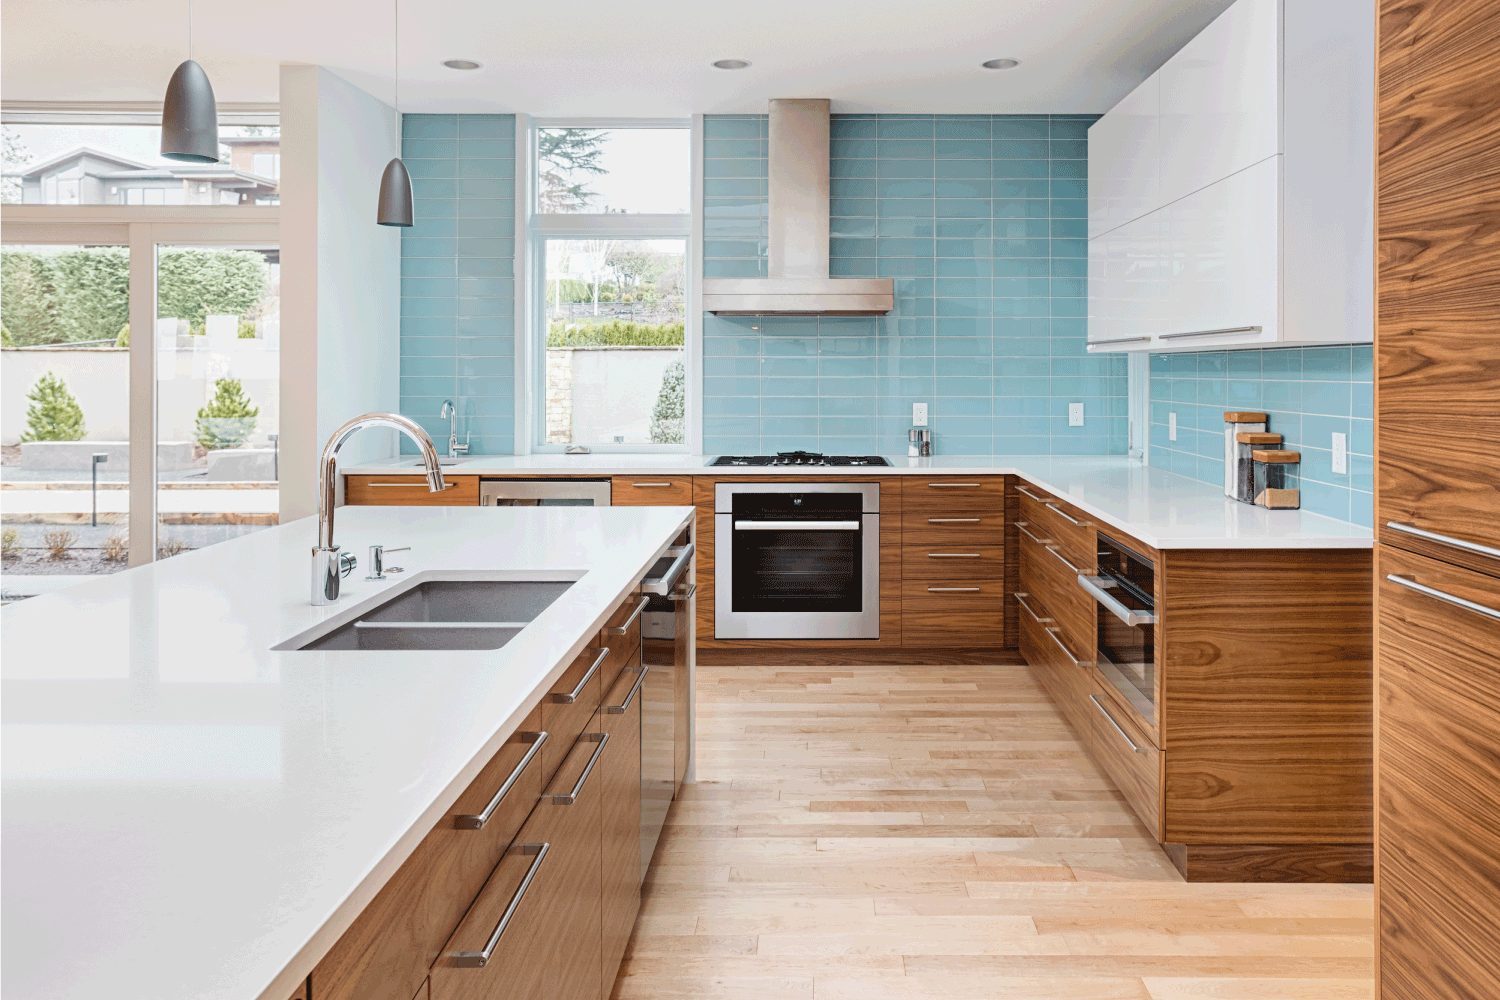 Beautiful modern kitchen in new contemporary style luxury home, with island, pendant lights, hardwood floors, and stainless steel appliances. Features blue tone tile that extends to the ceiling